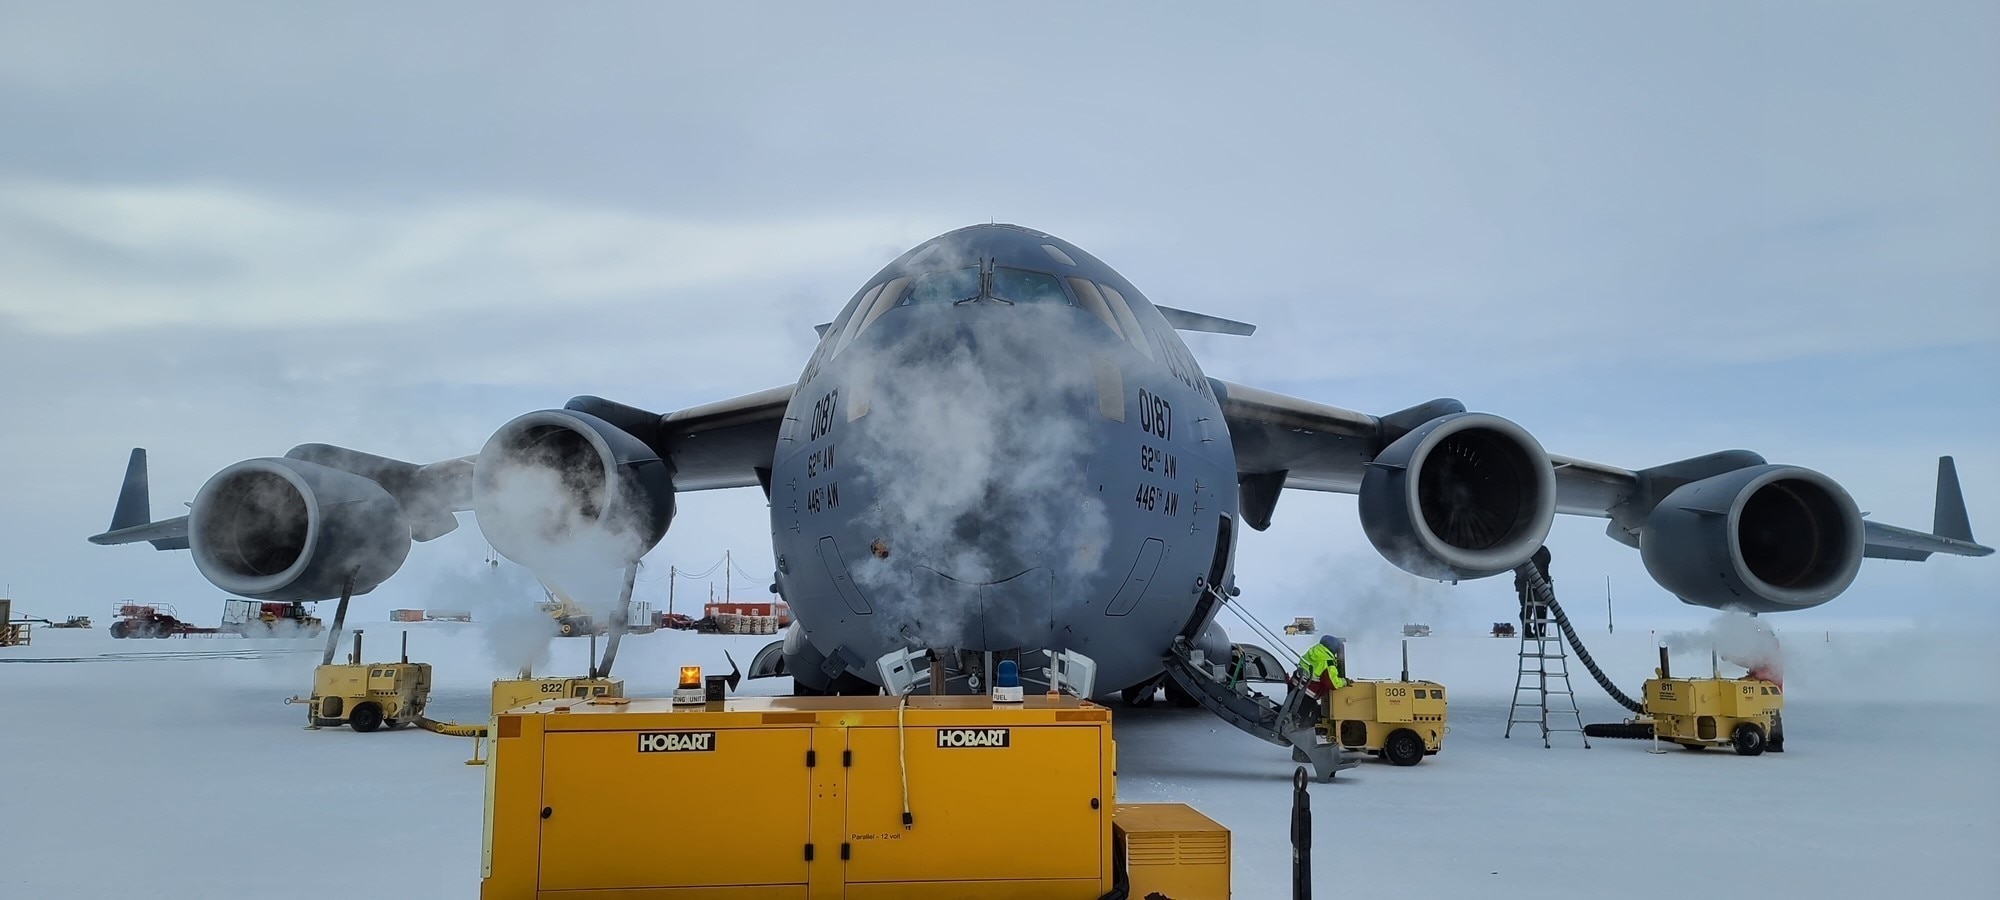 A C-17 Globemaster III, assigned to the 62nd Airlift Wing at Joint Base Lewis-McChord, Washington, sits at McMurdo Station in Antarctica in support of Operation Deep Freeze. ODF is unlike any other U.S. military operation. It is one of the military's most difficult peacetime missions due to the harsh Antarctic environment. The U.S. military is uniquely equipped and trained to operate in such an austere environment and has therefore provided support to the USAP since 1955. (U.S. Air Force photo by Maj. Tyler Boyd)